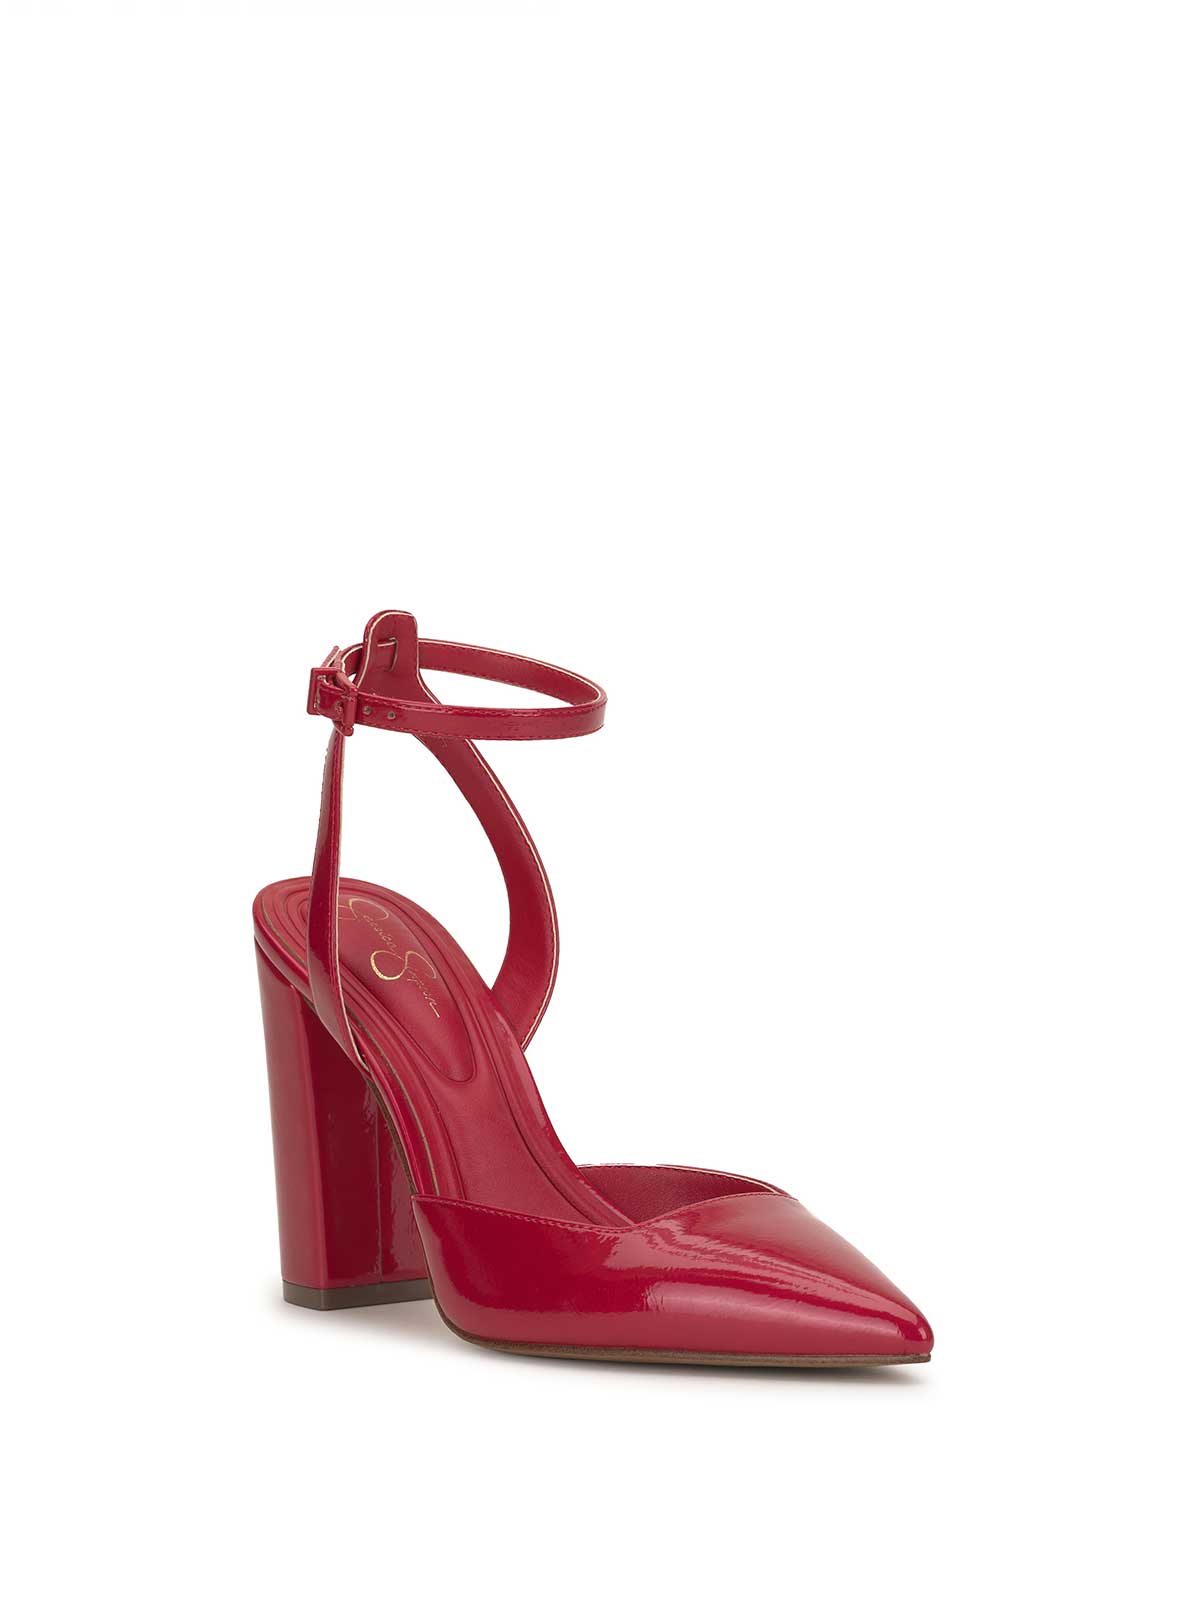 Nazela Pump in Red Muse – Jessica Simpson